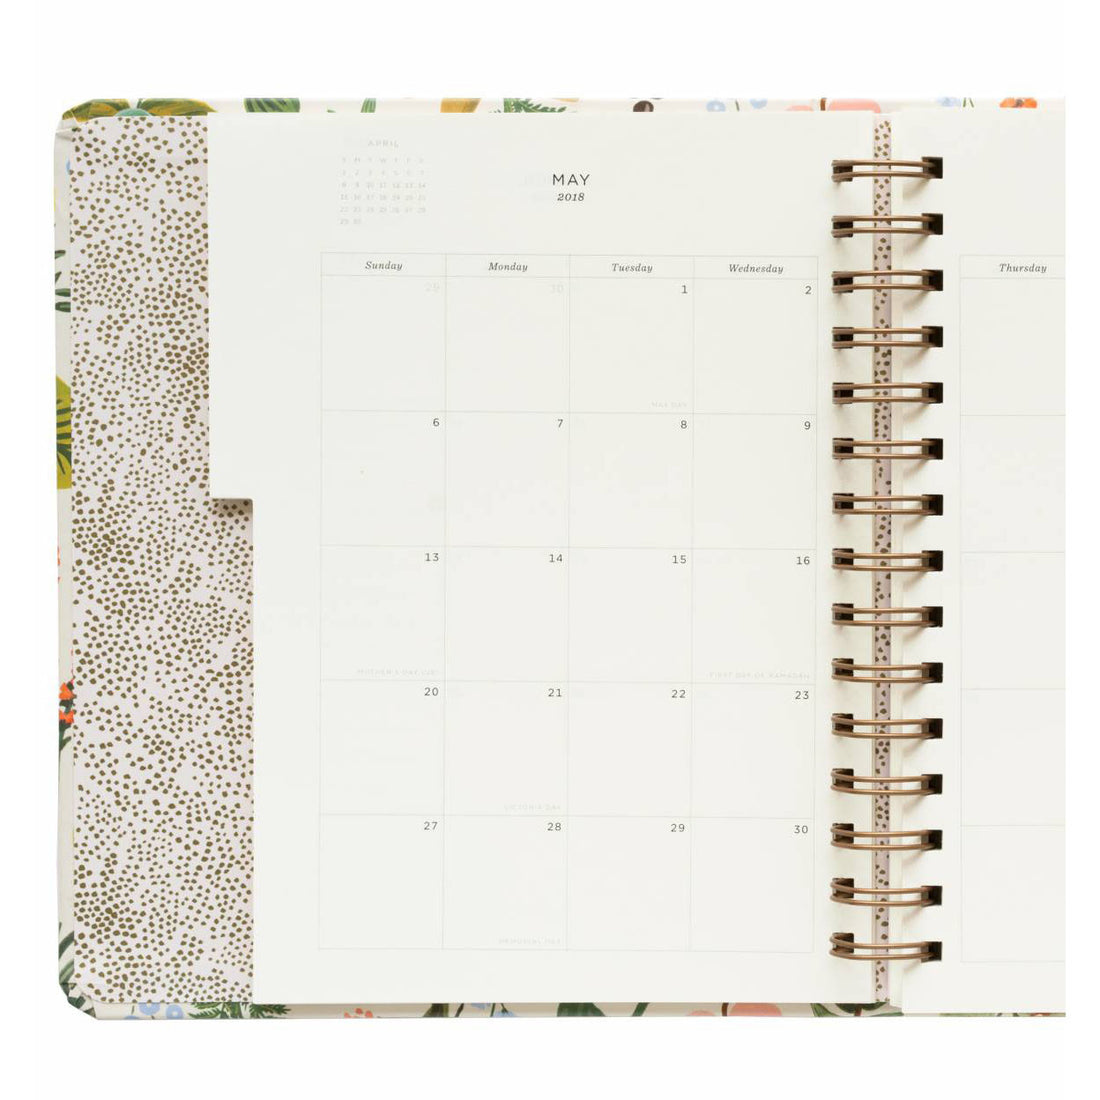 rifle-paper-co-2018-herb-garden-covered-spiral-planner- (8)